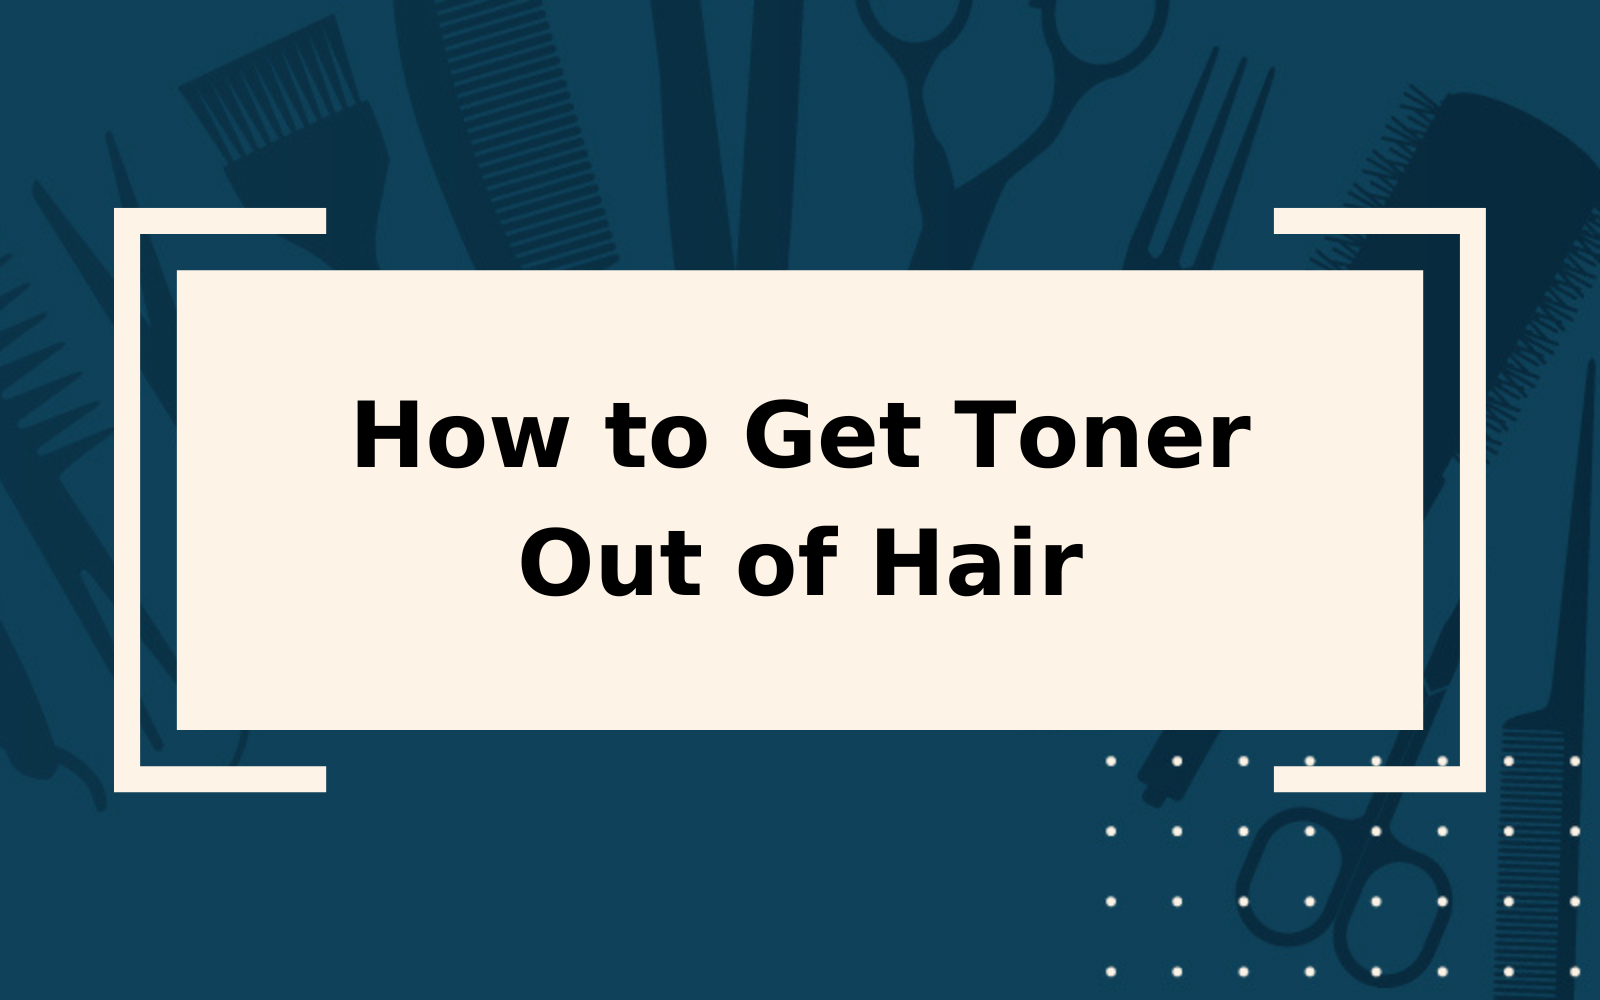 How to Get Toner Out of Hair | Step-by-Step Guide